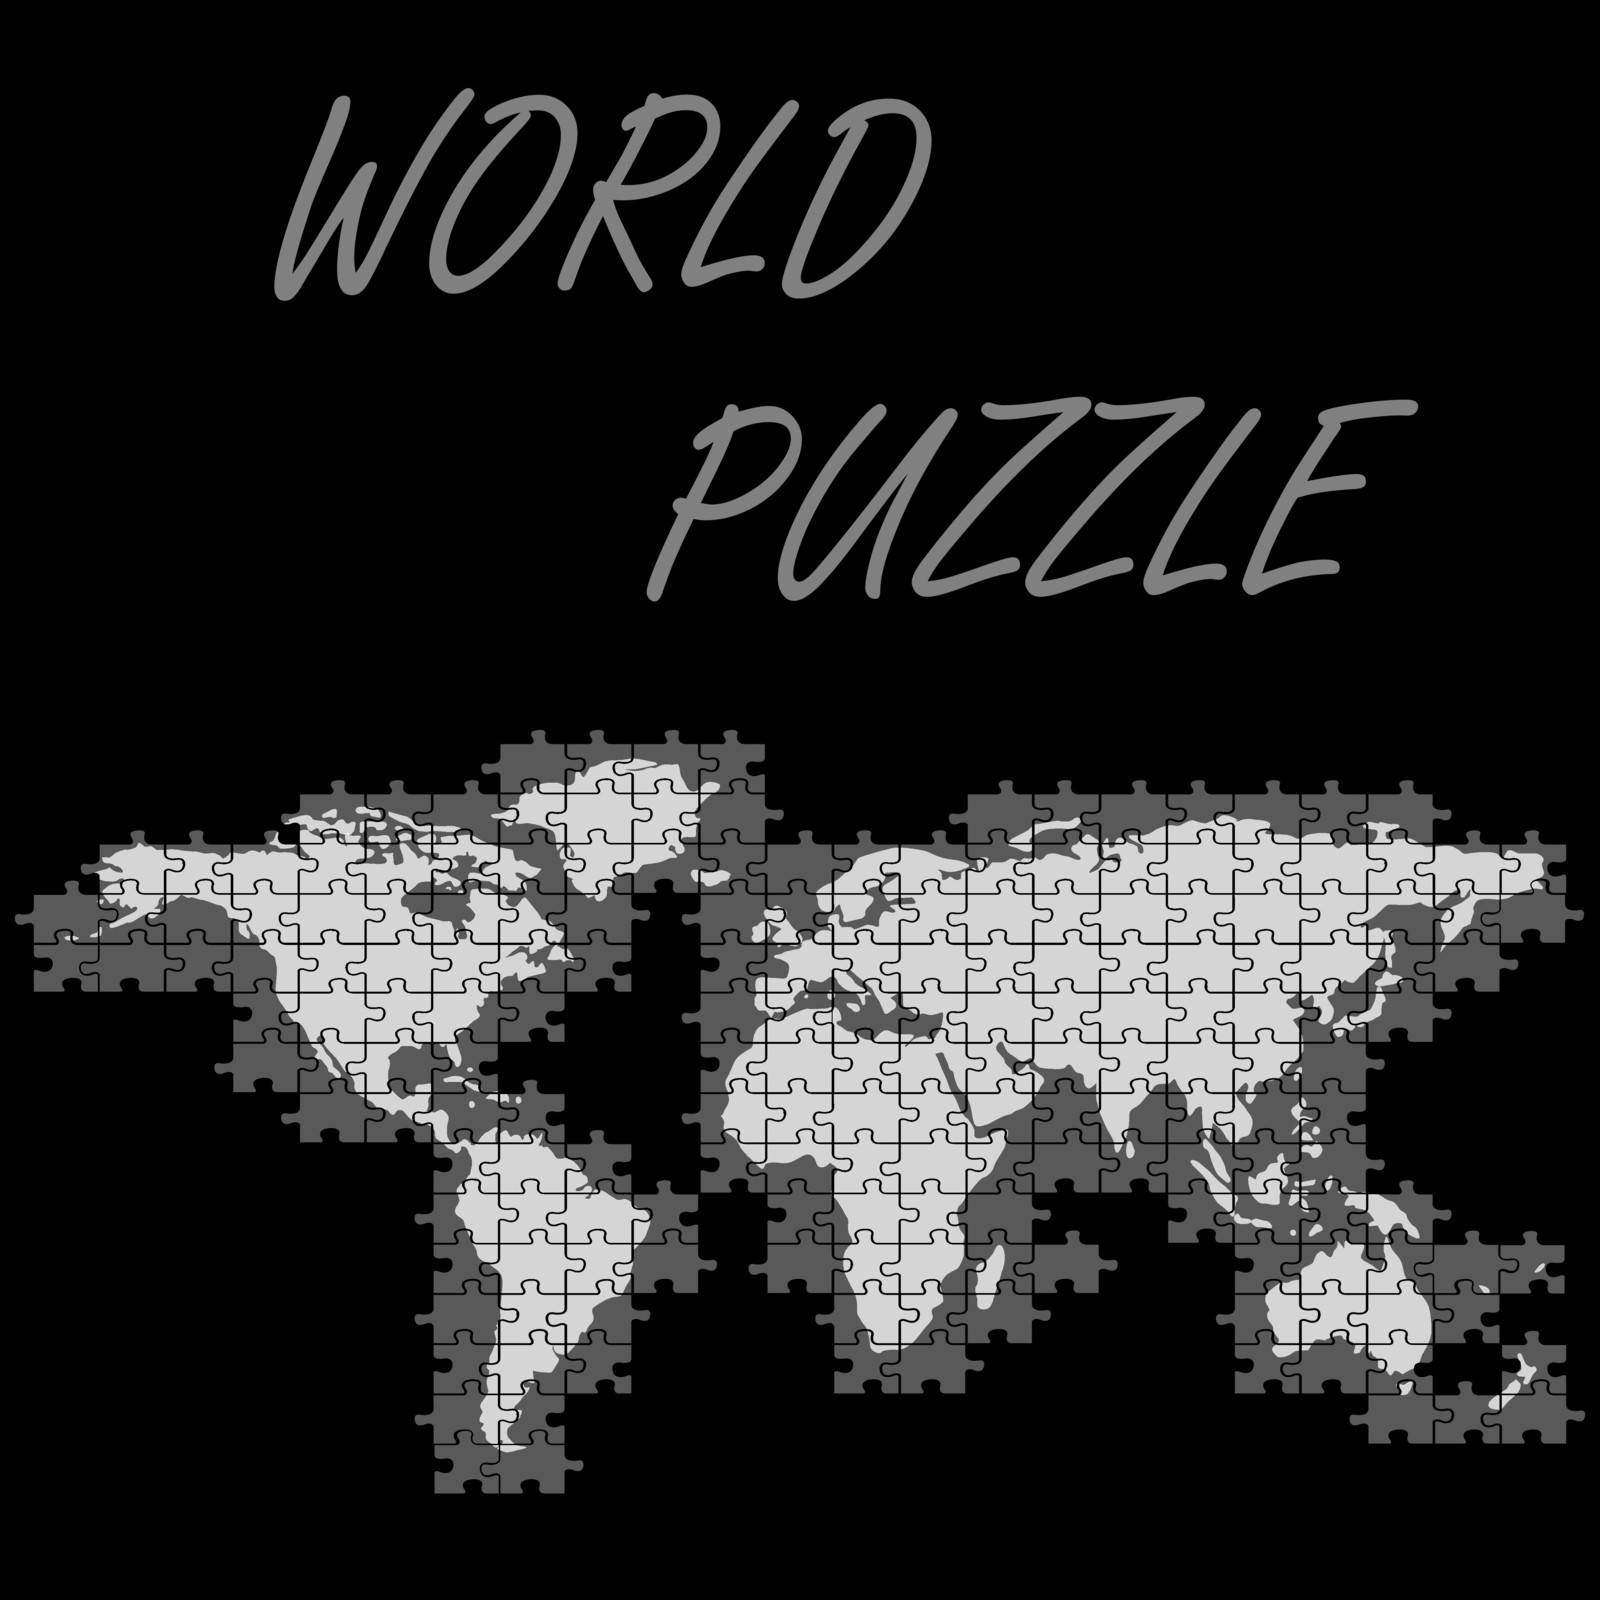 world puzzle map, abstract vector art illustration